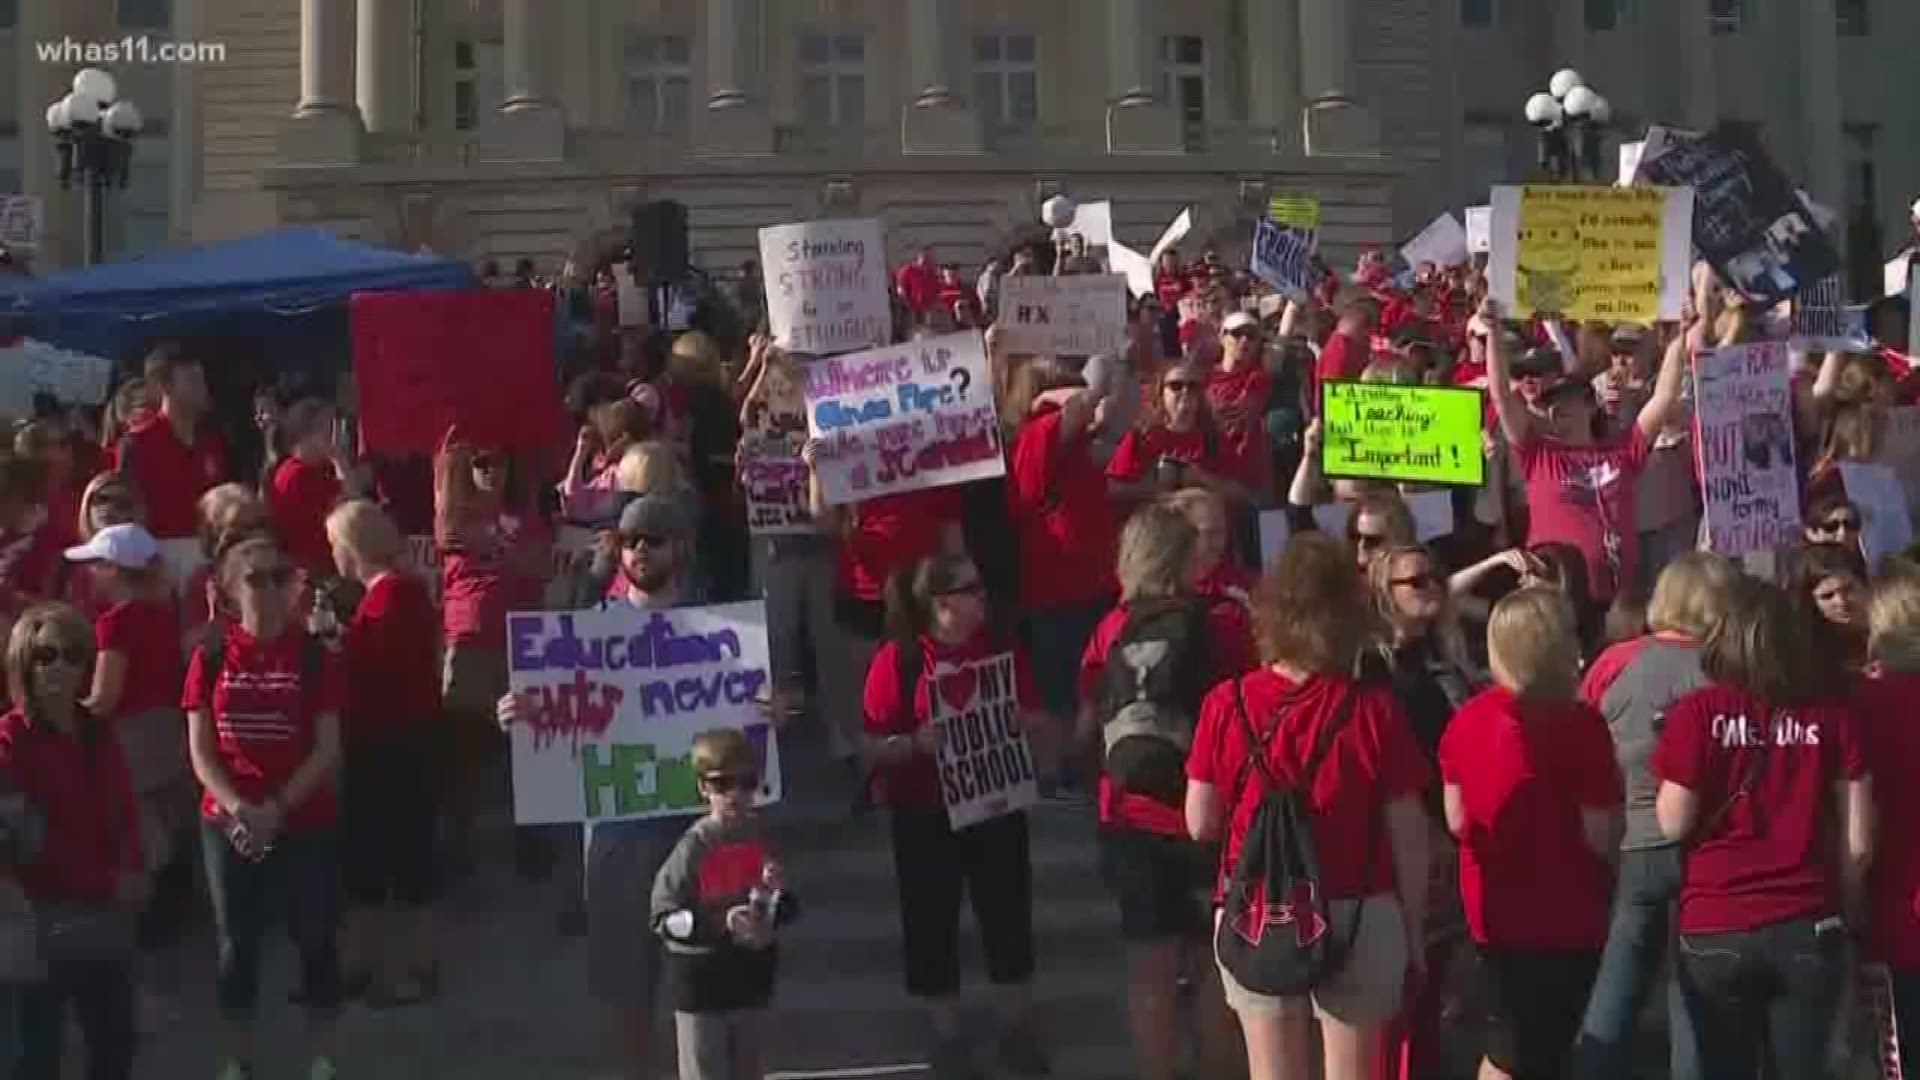 Teachers continue to rally in Frankfort